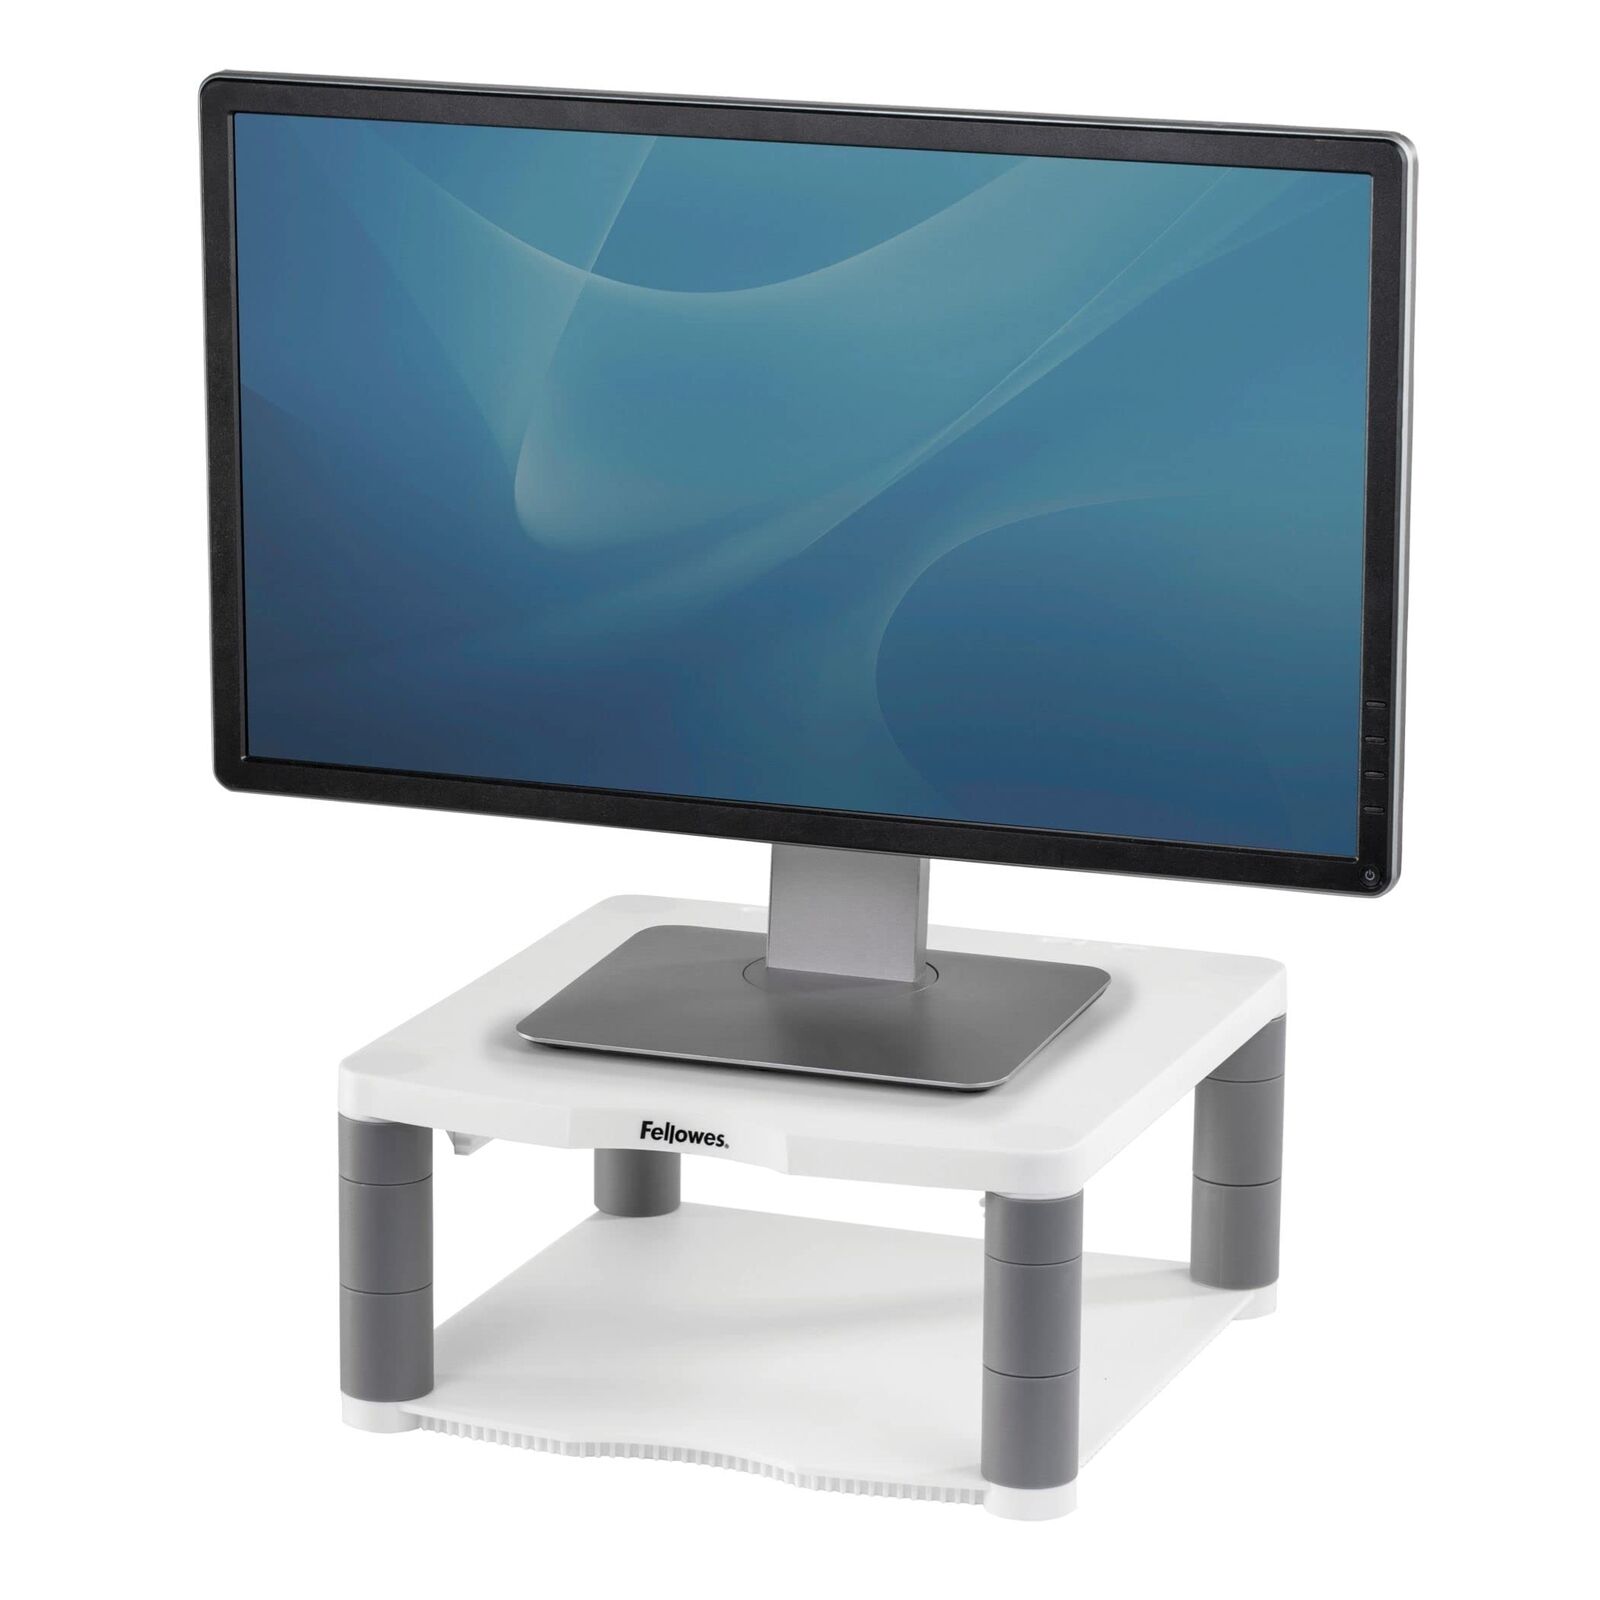 Fellowes Premium Adjustable Monitor Stand, White, Supports Up To 36kg or 21”, 5 